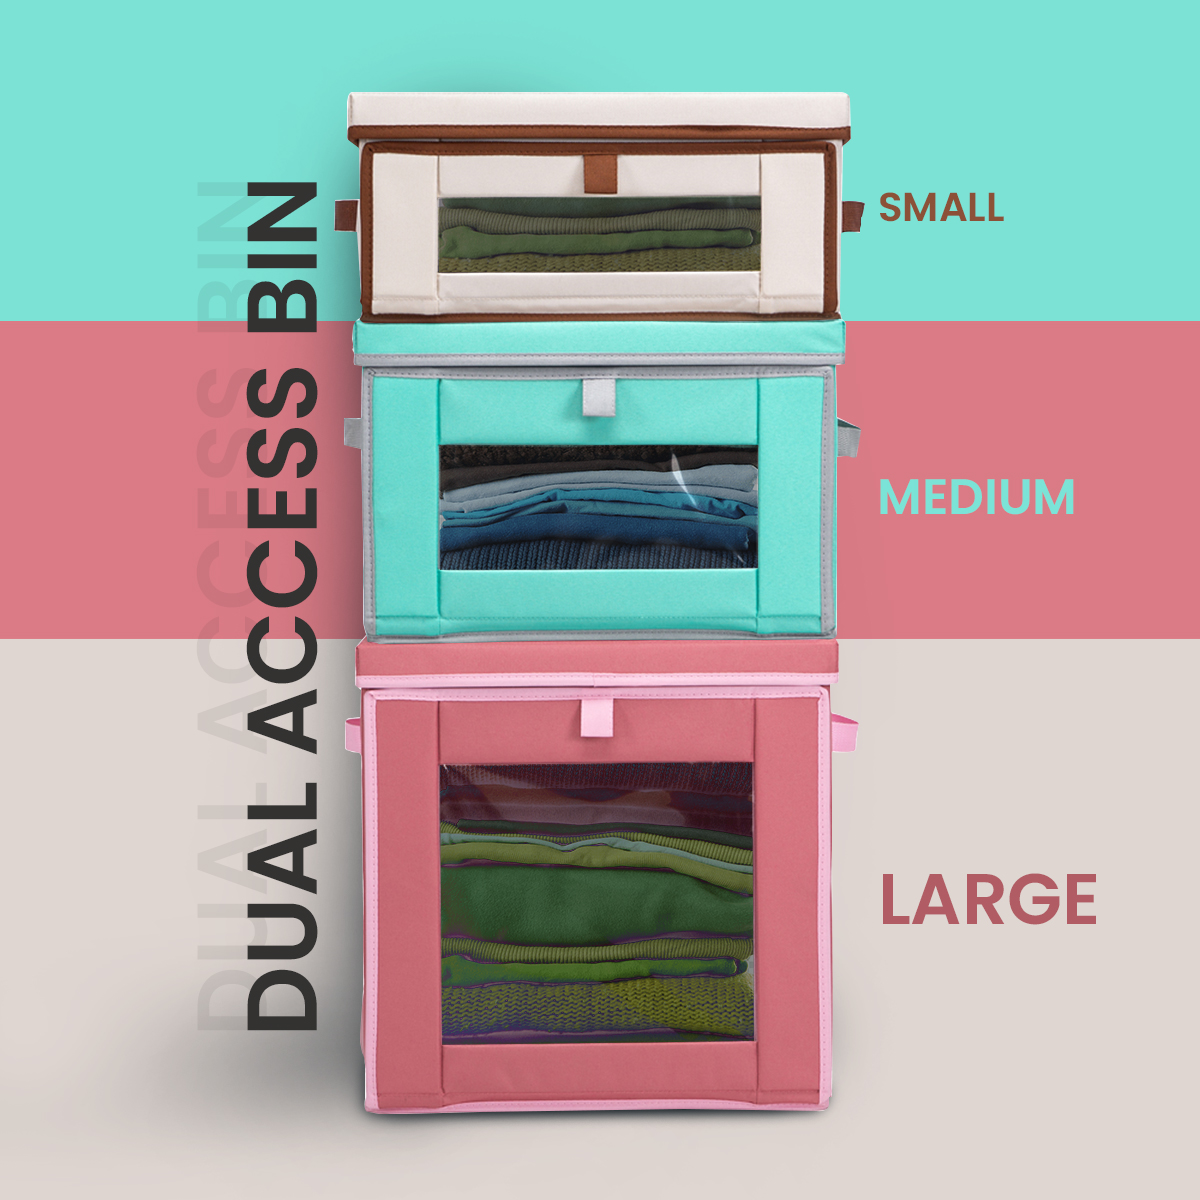 Dual access bins- Cleanliness and convenience go hand in hand with Dual Access Bins

Shop Dual Access Bins link in BIO.

#organizeme #homeorganizer #organizedhome #cleanandconvenient #maximizeyourspace #tidyandefficient #clutterfree #reduceyourclutter #efficientworkspace